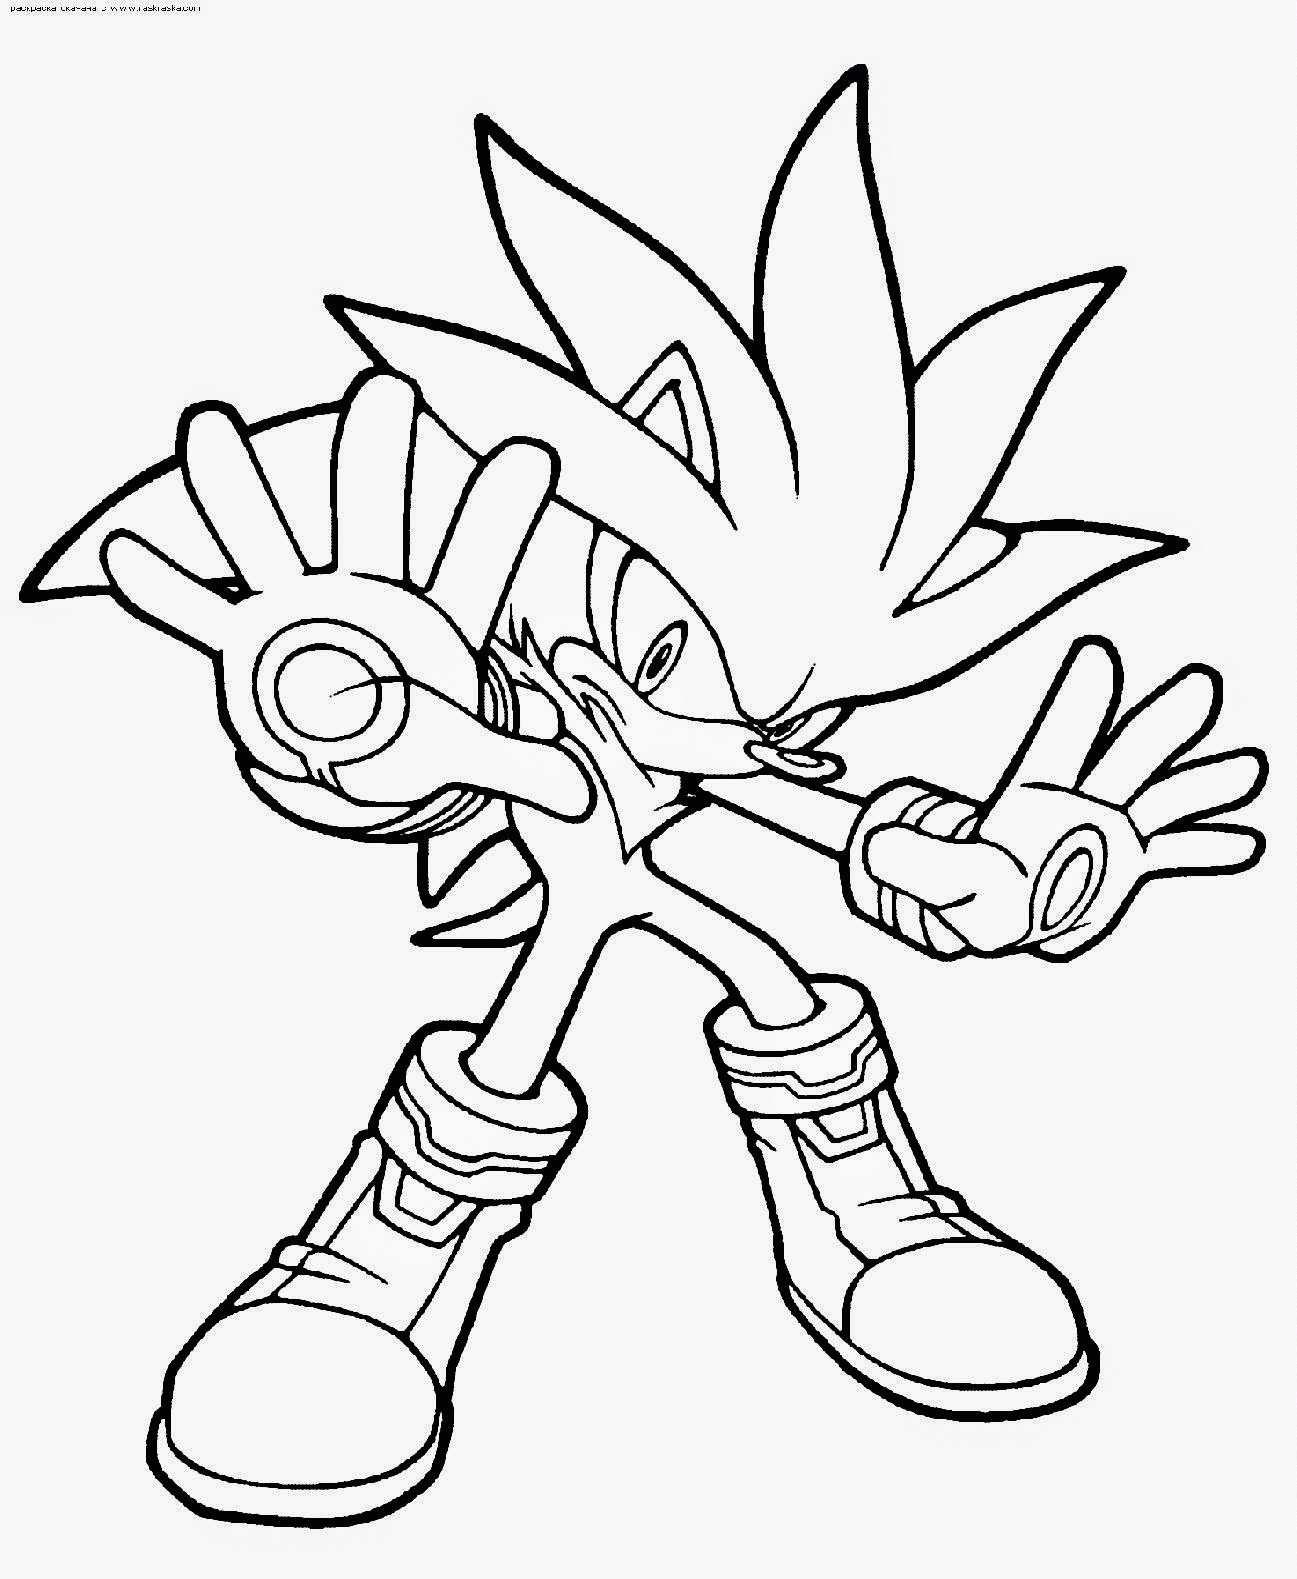 Sonic The Hedgehog Coloring Pages Shadow - Coloring Page Photos